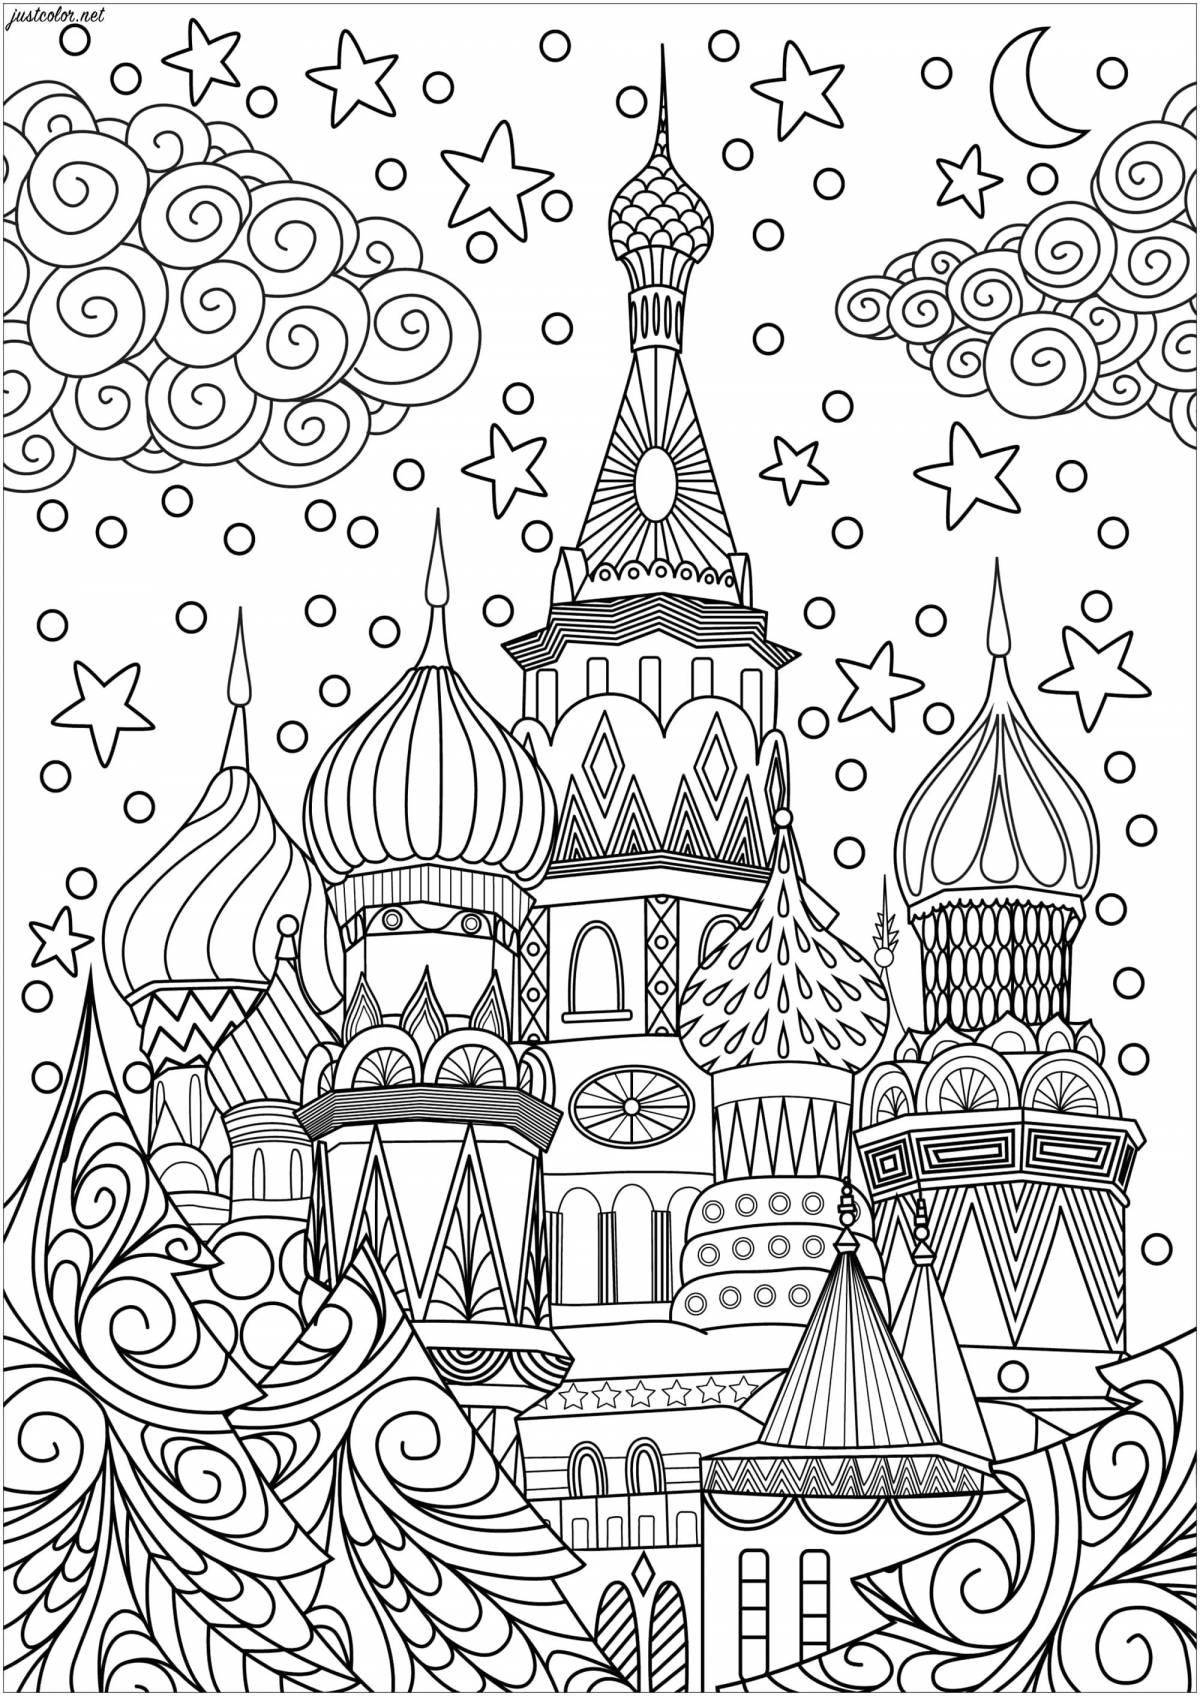 Incredible moscow coloring book for kids